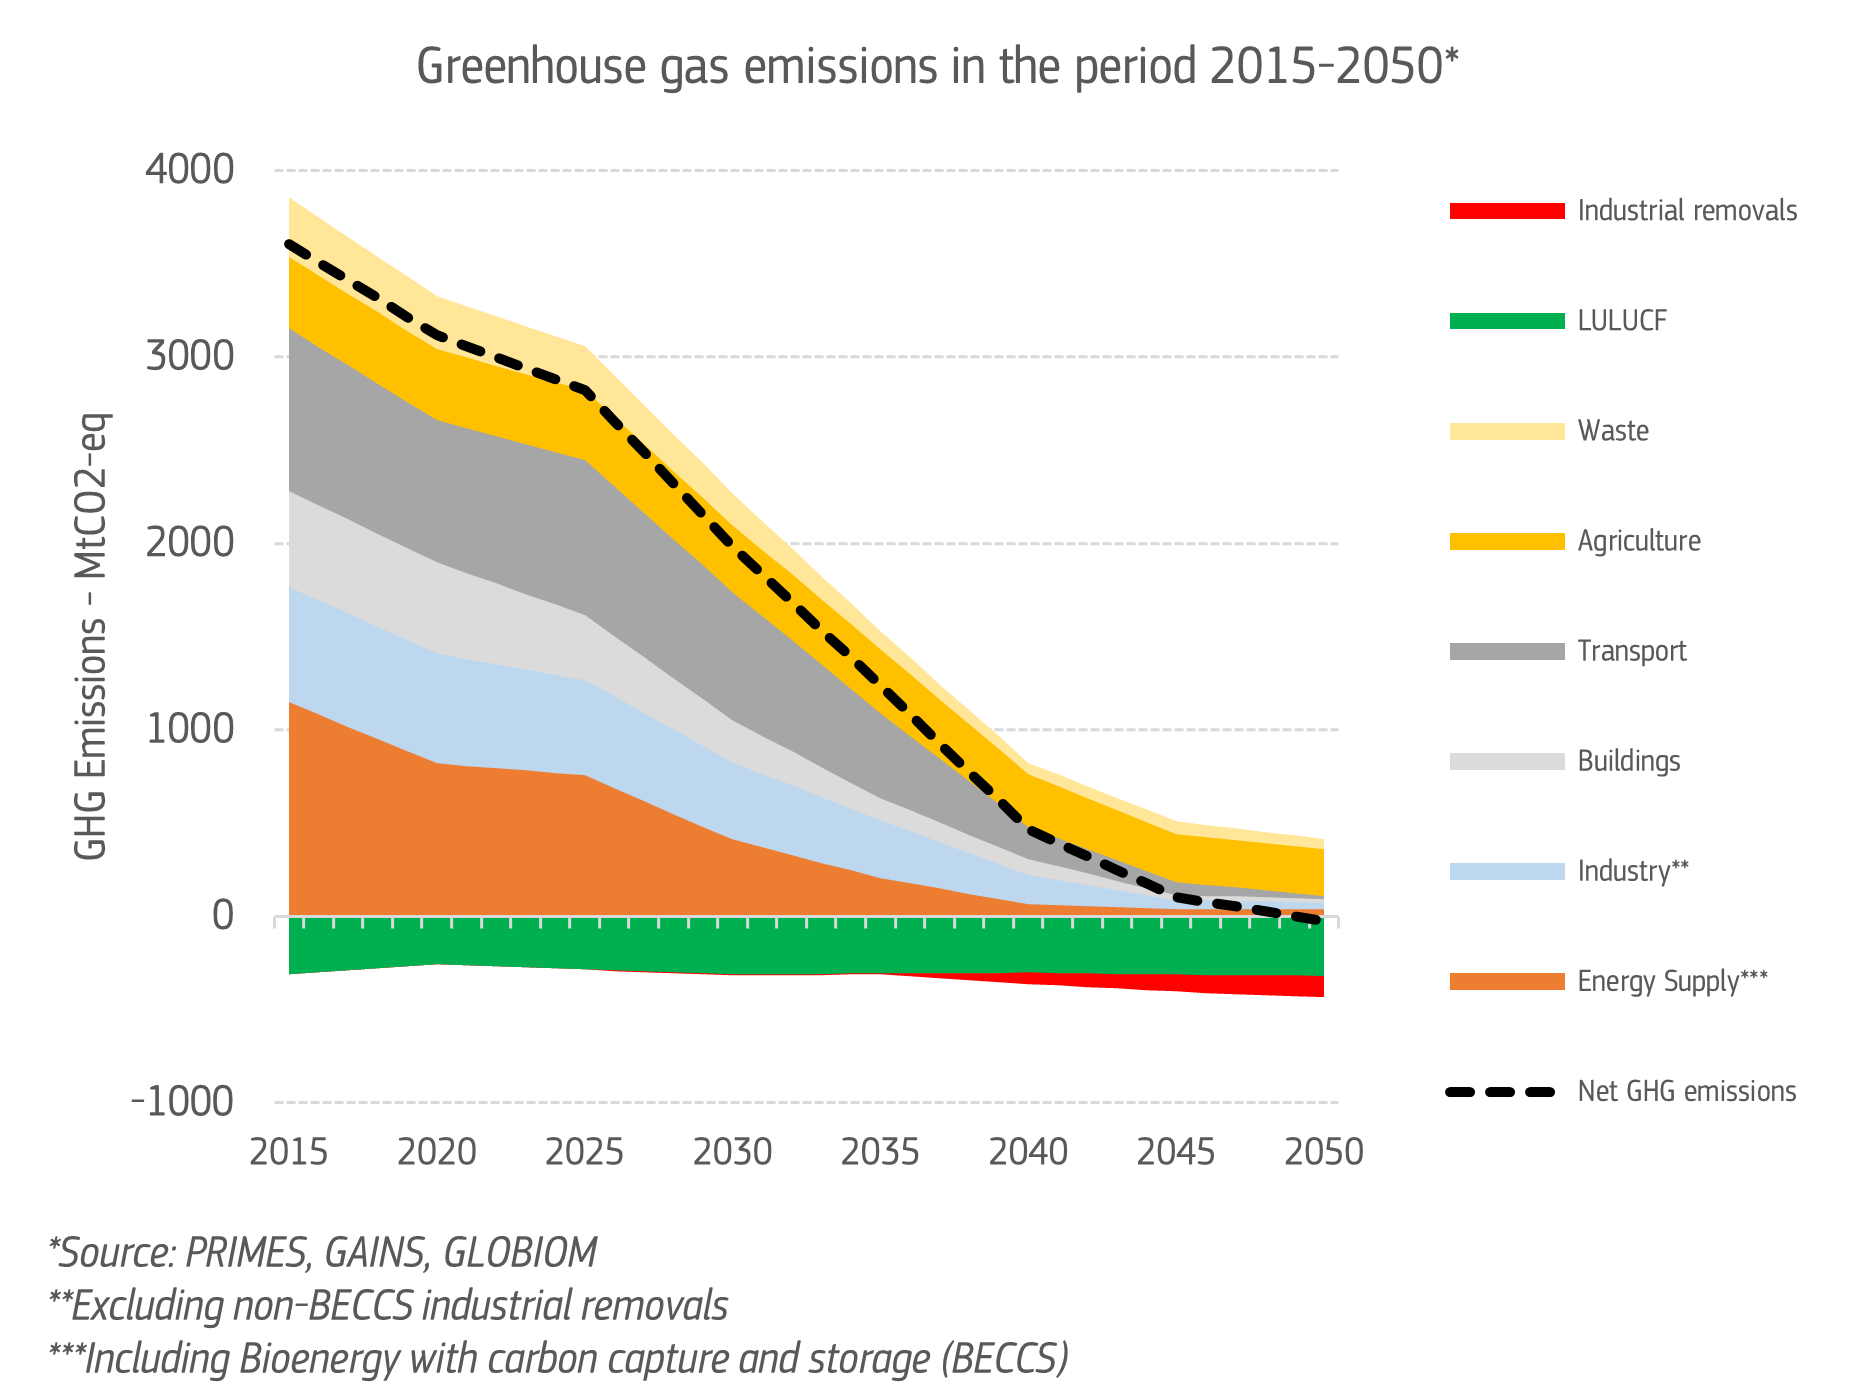 Greenhouse gas emissions in the period 2015-2050